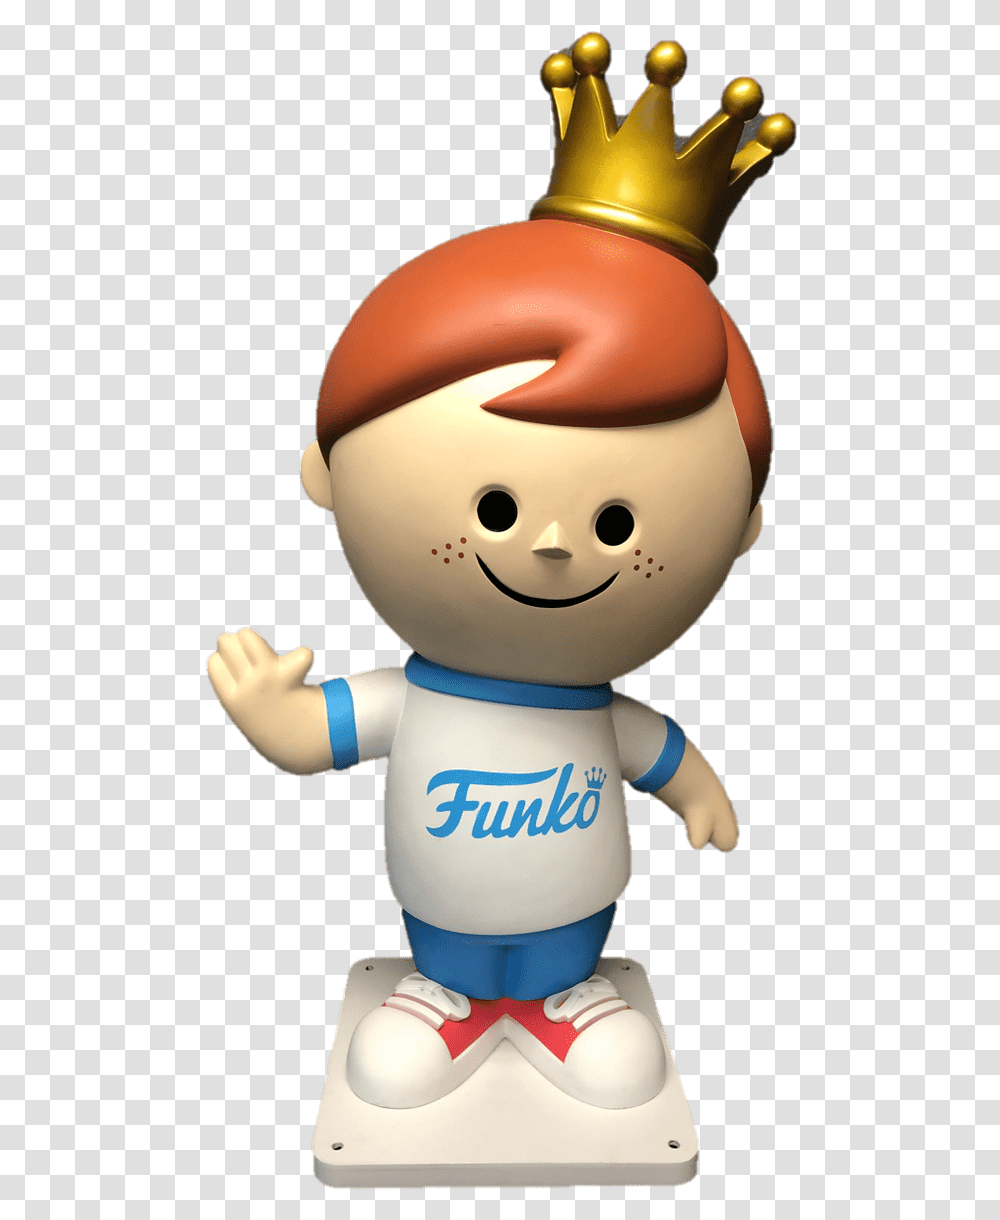 Real Freddy Funko, Doll, Toy, Figurine Transparent Png